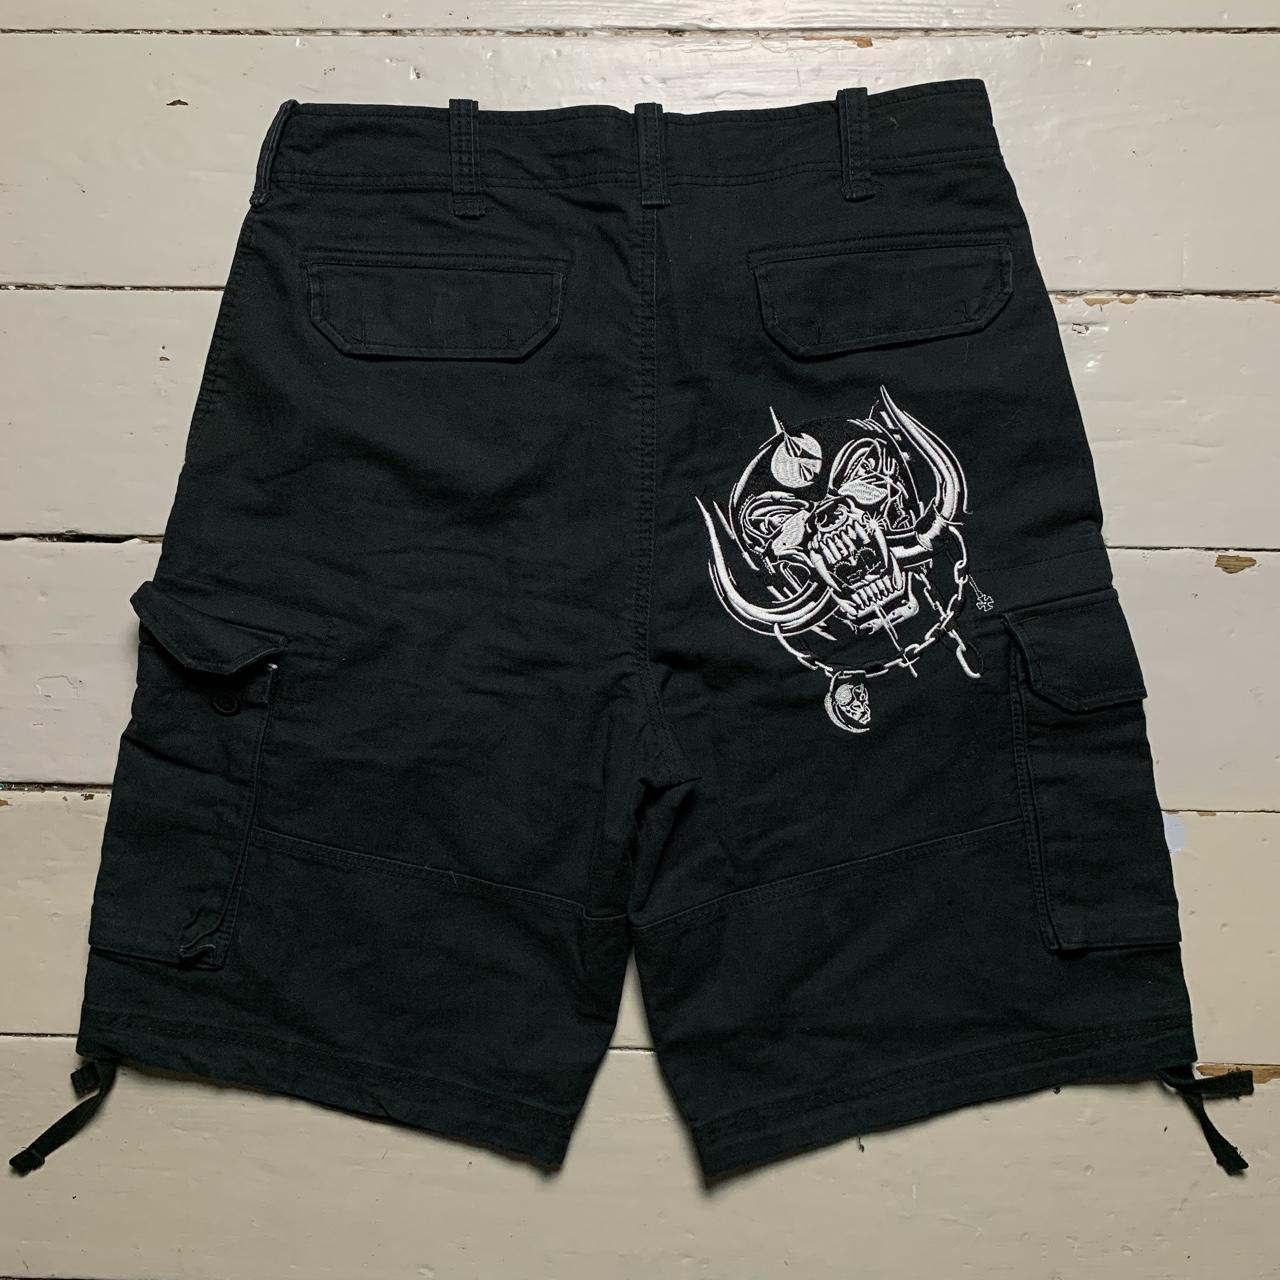 Motörhead 2008 Cargo Shorts Black and White Embroidery